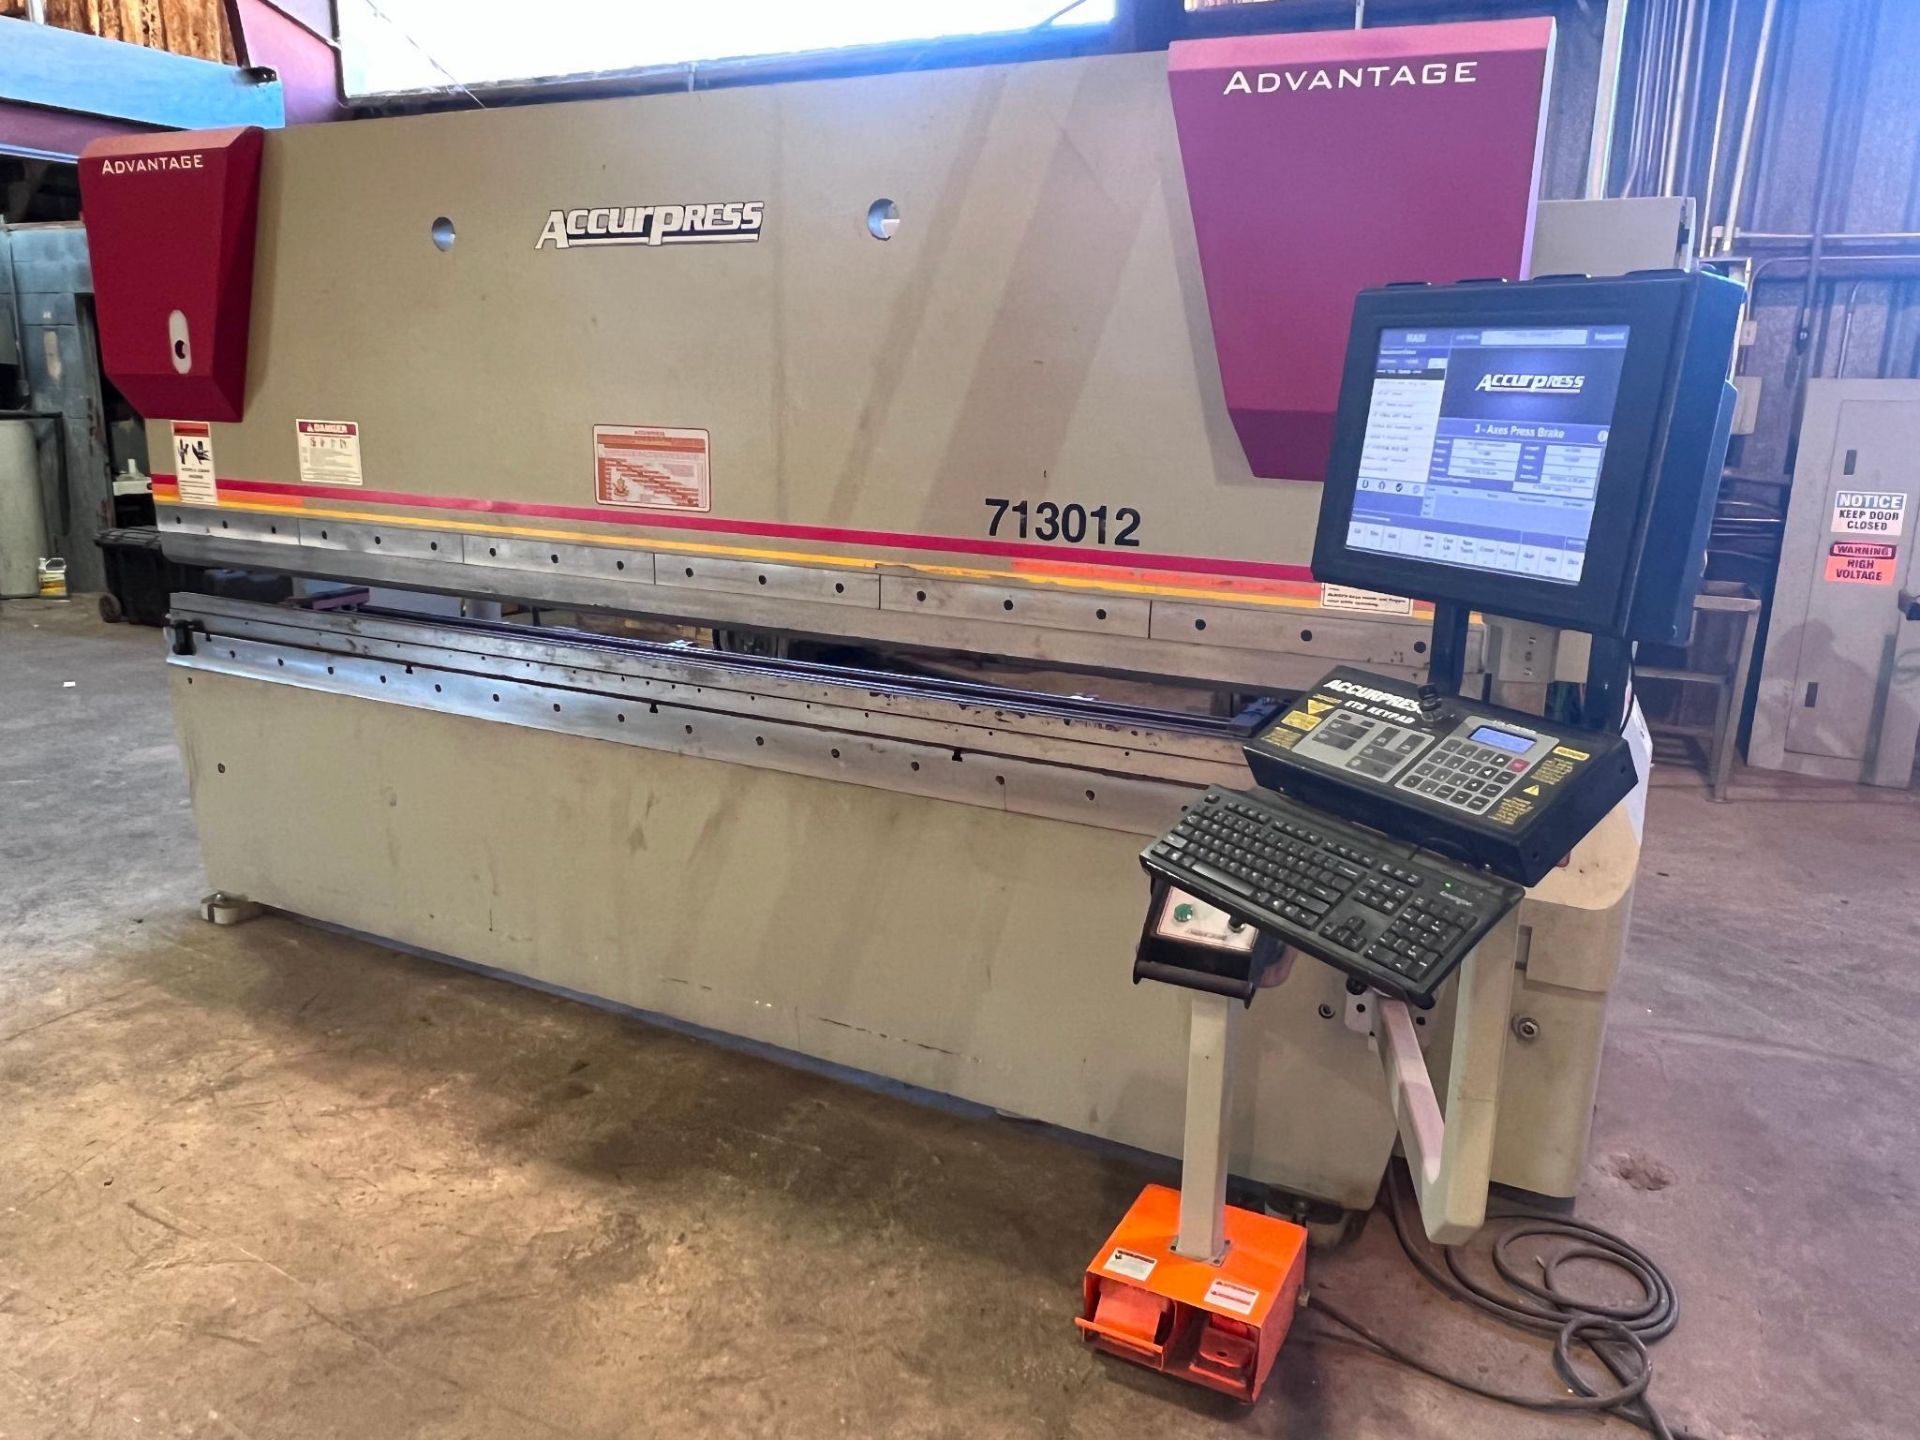 2018 Accurpress 713012 CNC Press Brake Serial Number 12968 Tons: 130 Bed Length: 12' Computer System